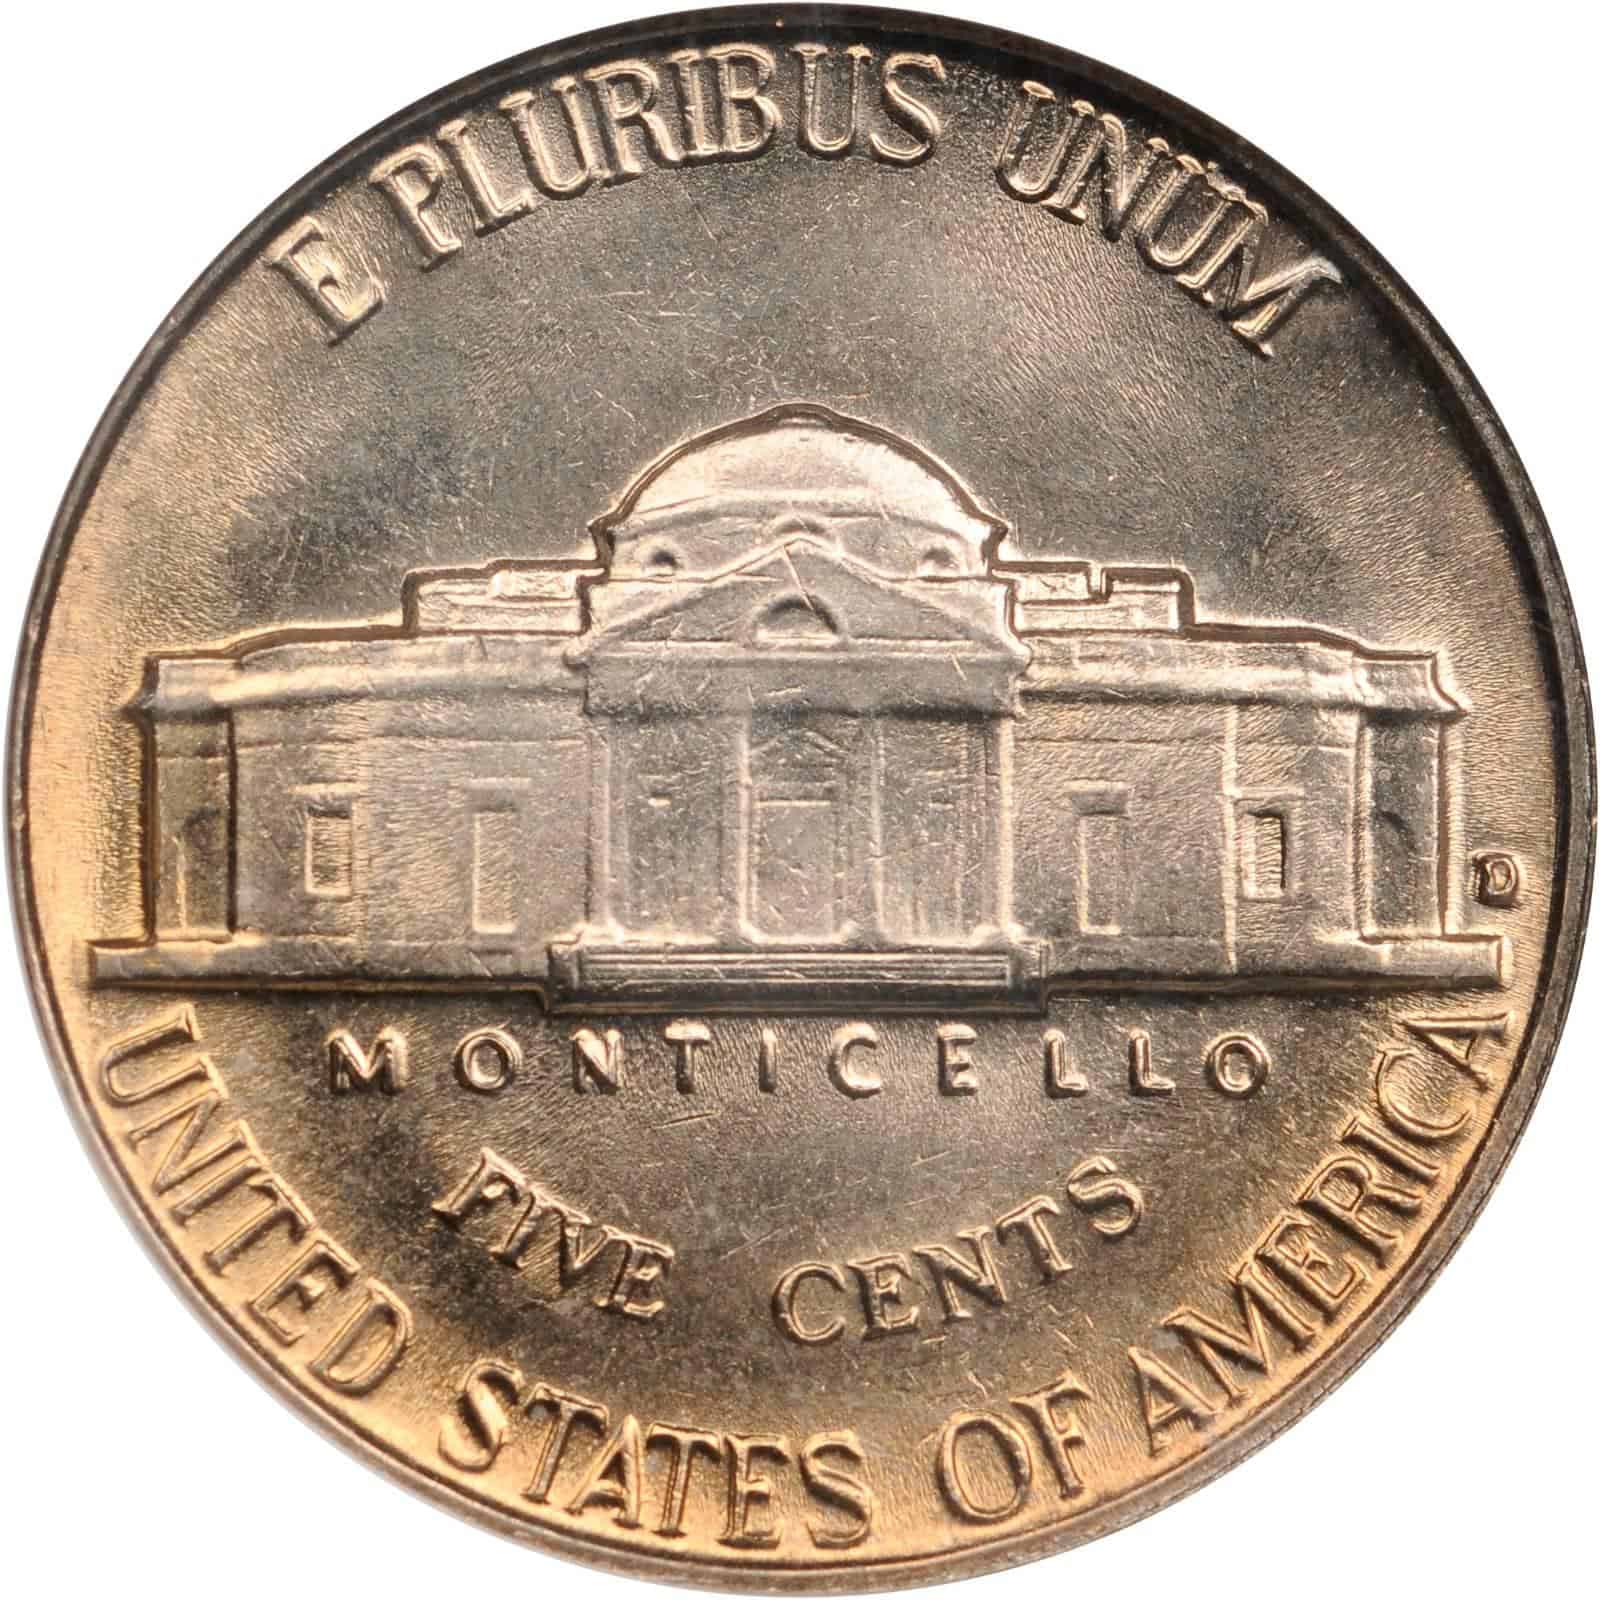 The Reverse of the 1964 Nickel